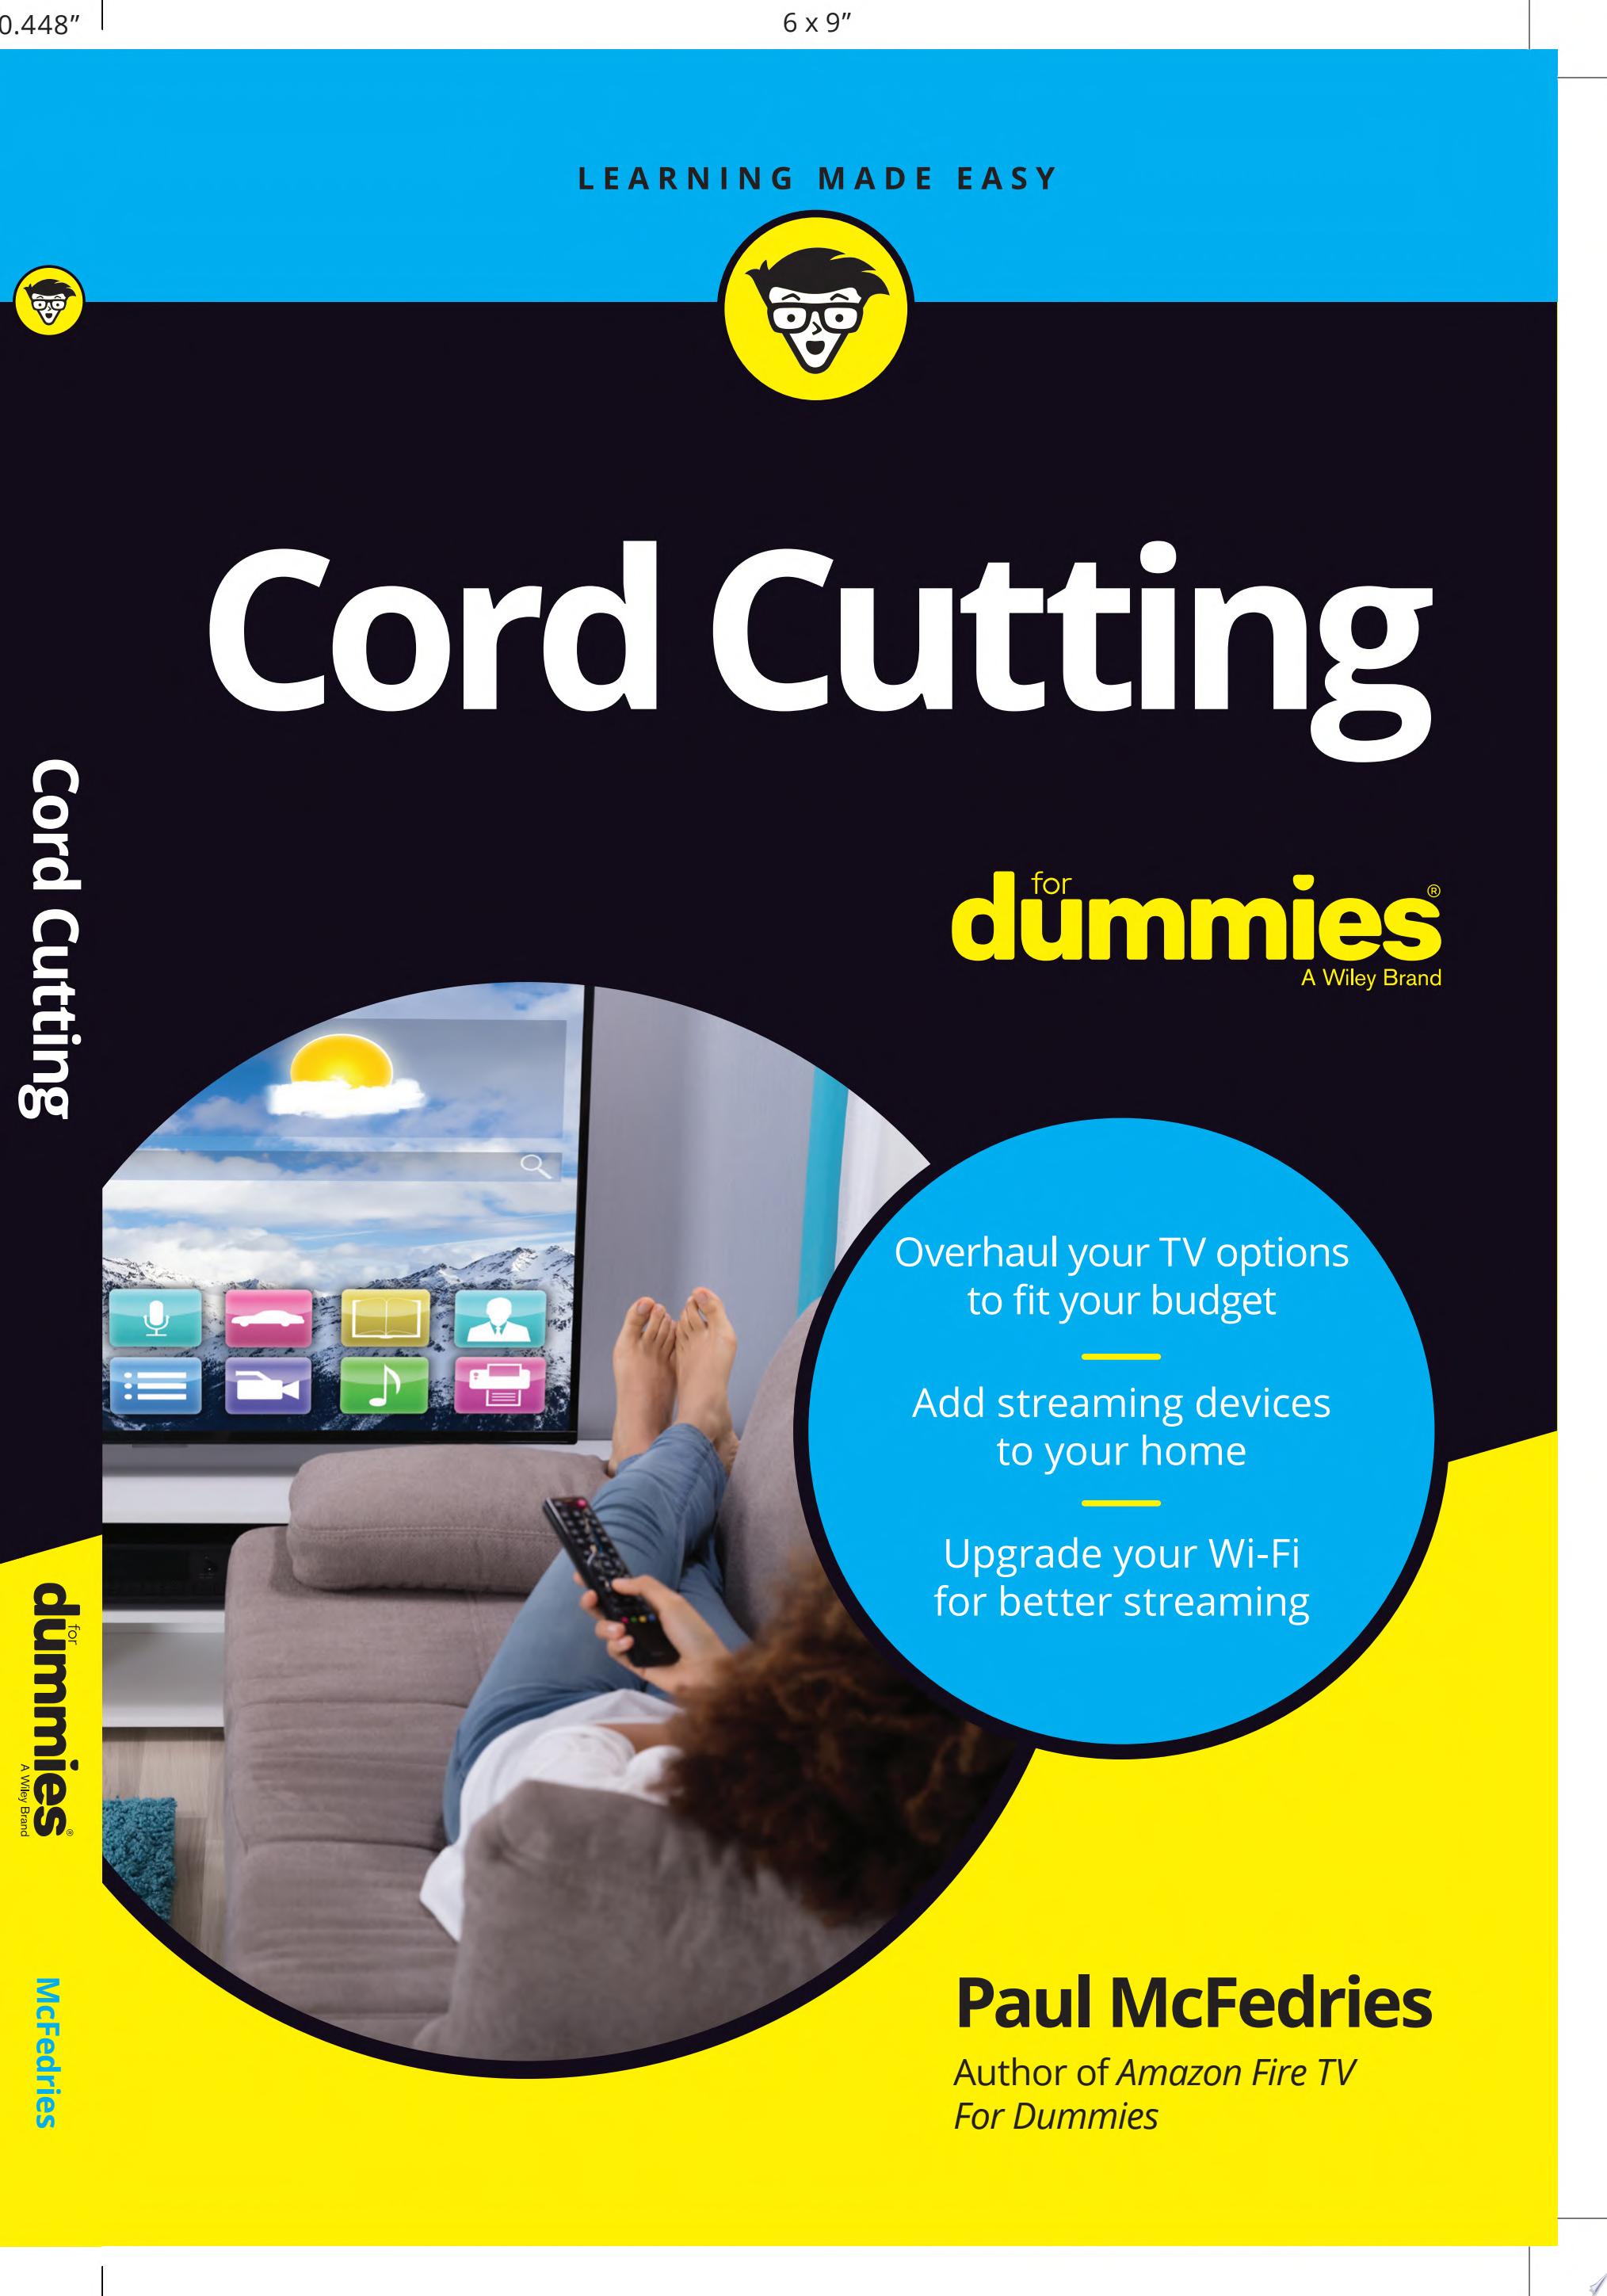 Image for "Cord Cutting For Dummies"